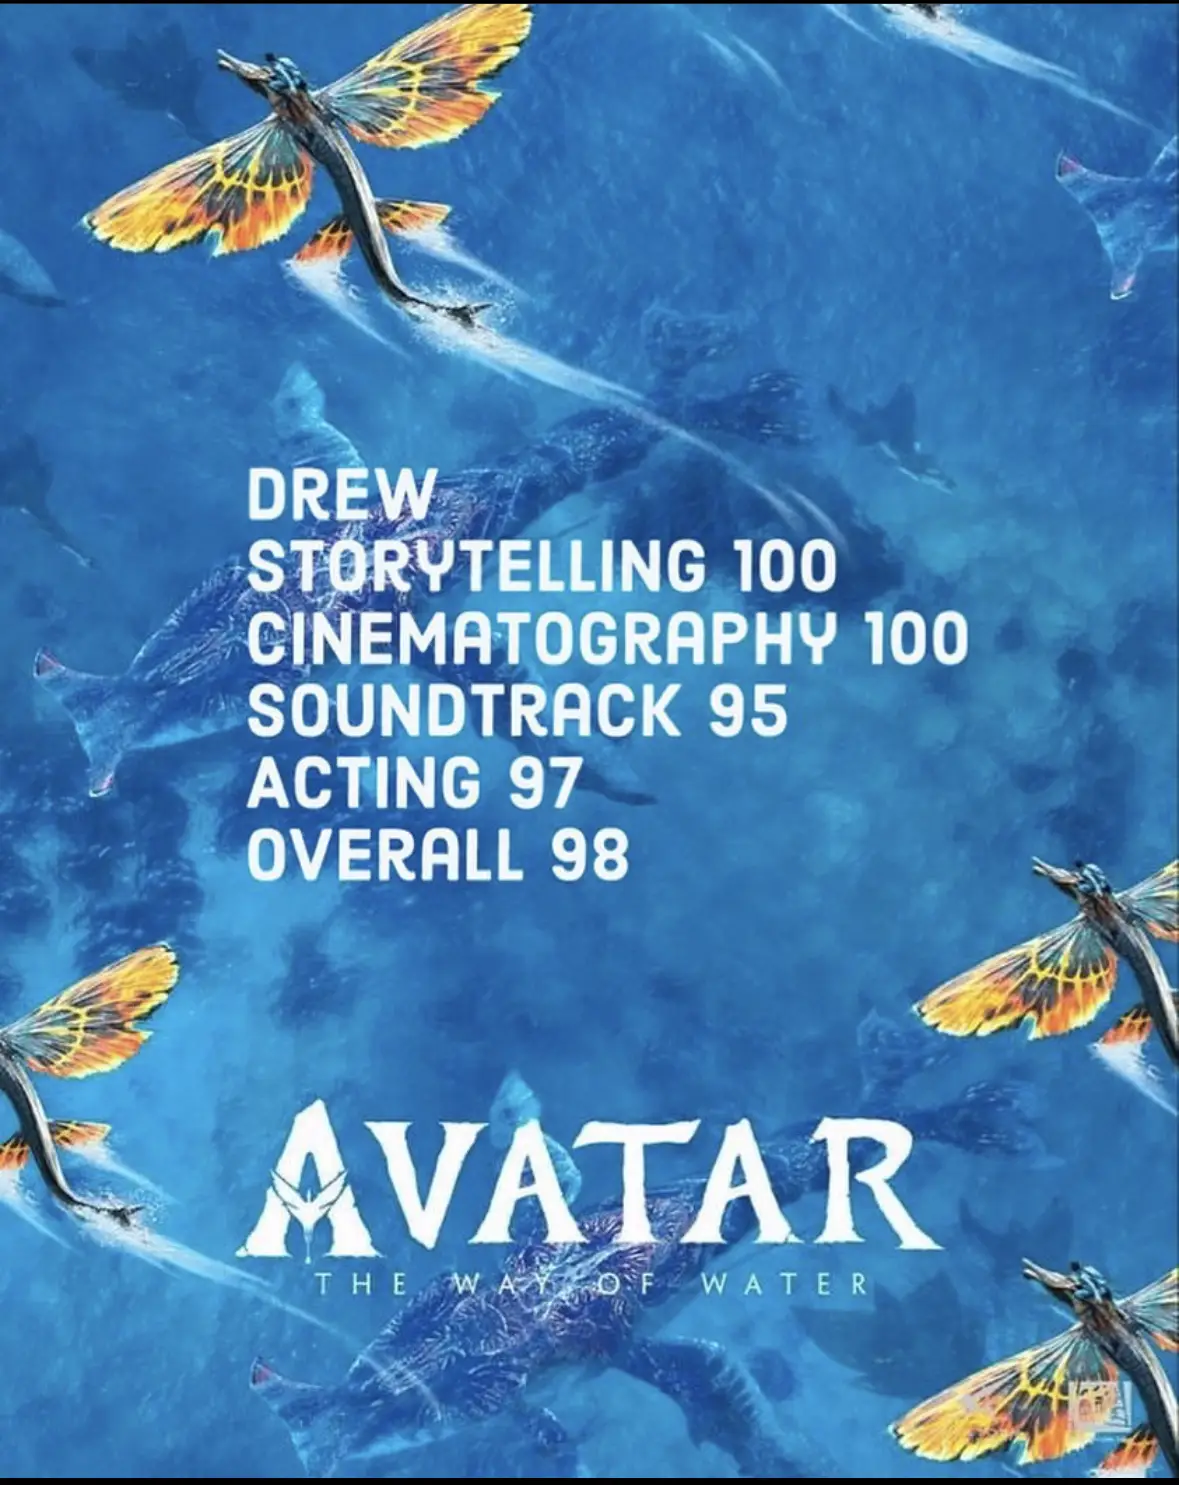 Avatar - The Way of Water's images(0)